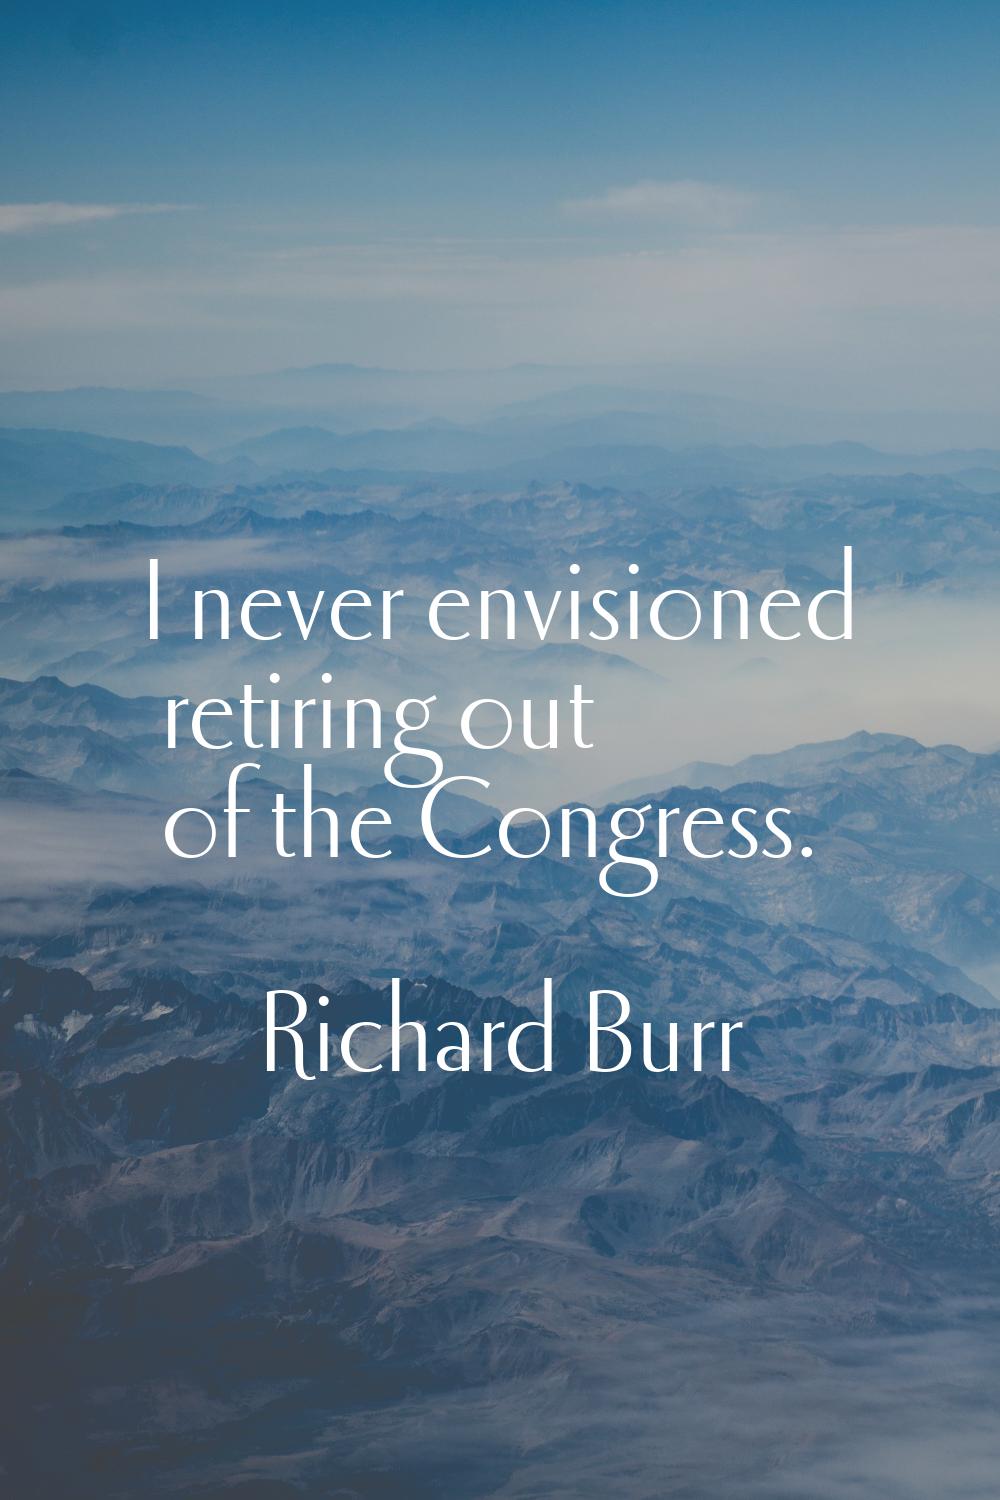 I never envisioned retiring out of the Congress.